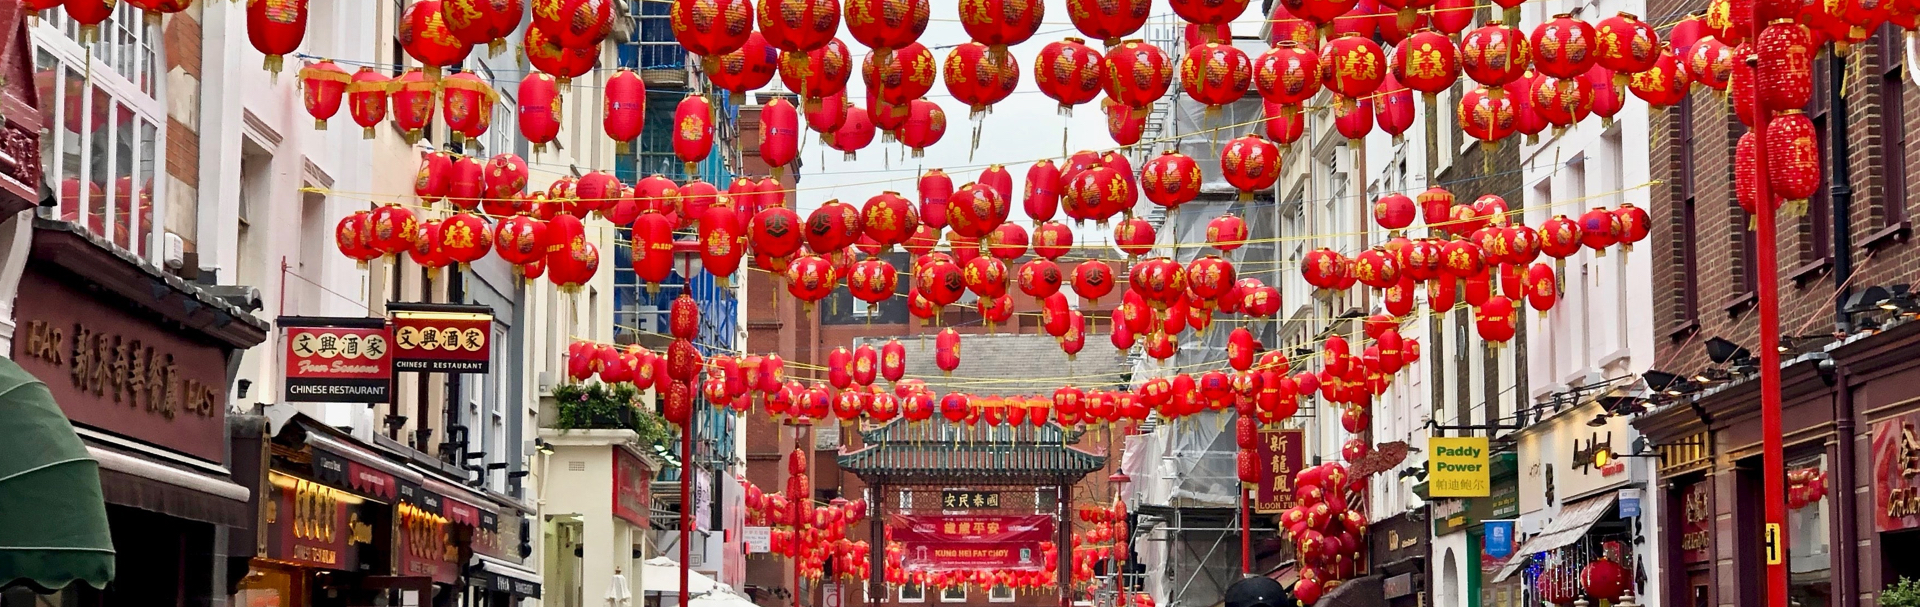 a street photo of London's China Town, with hundreds of red hanging lanterns